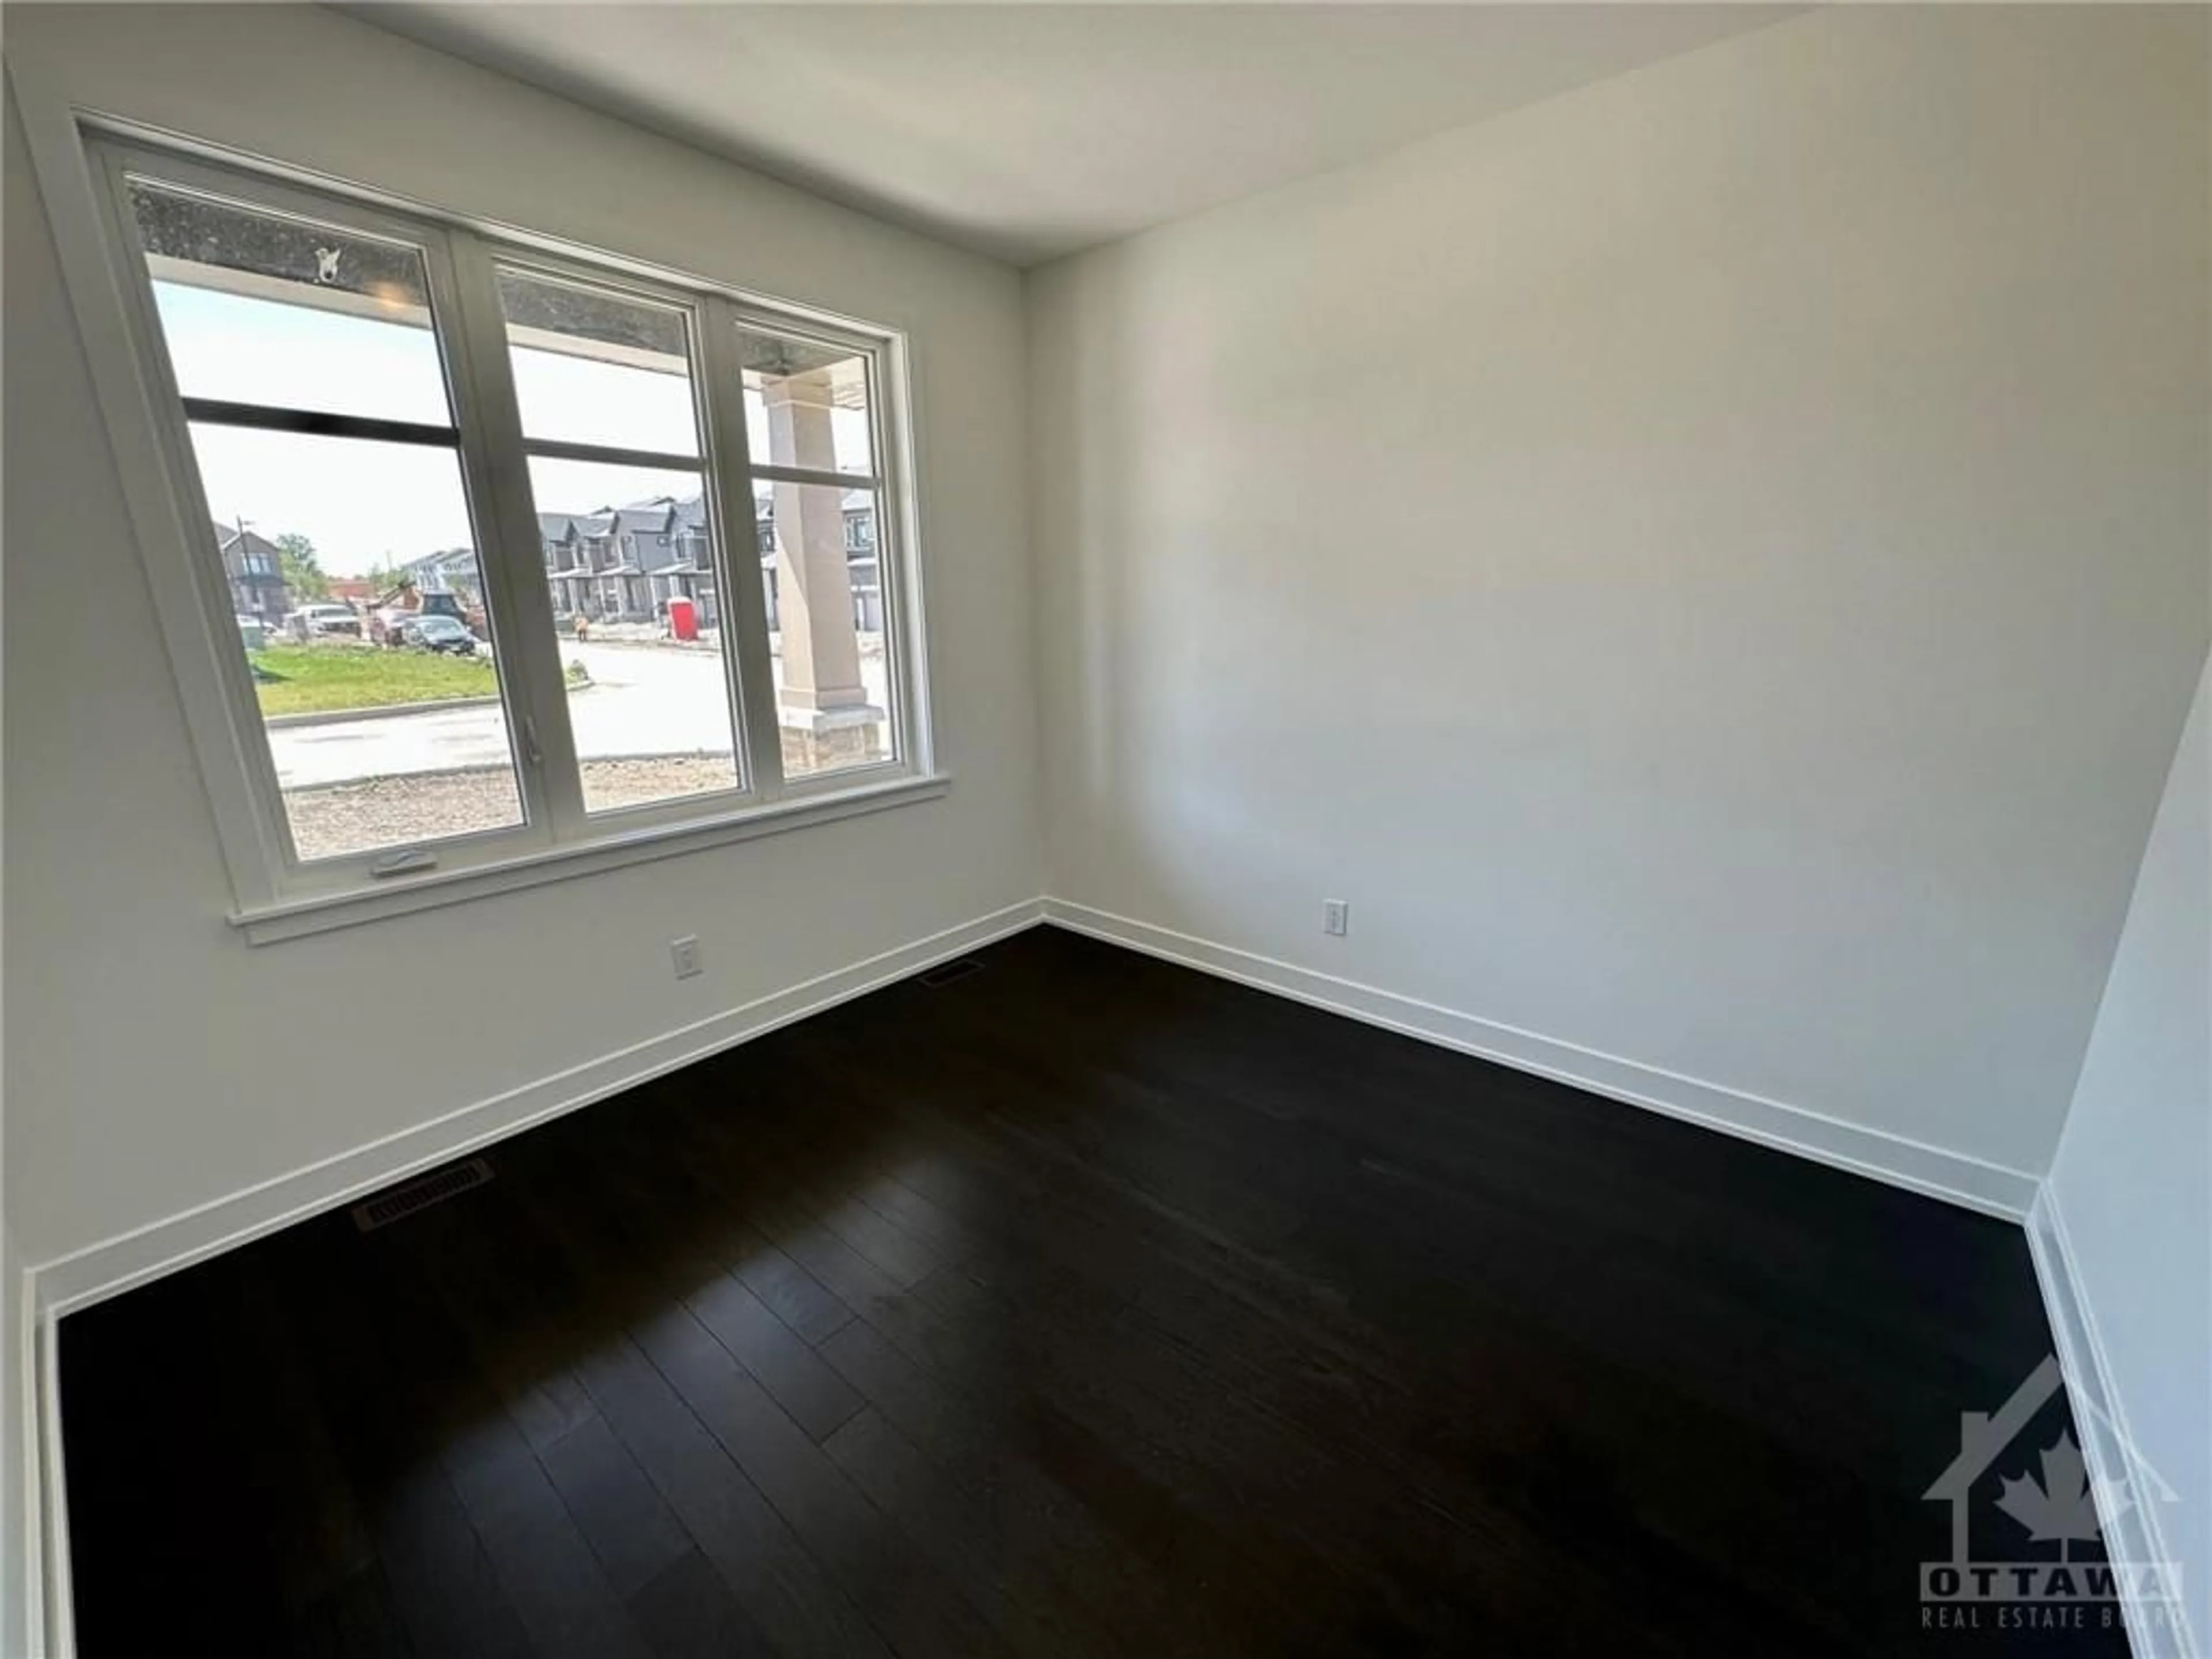 A pic of a room for 724 ODYSSEY Way, Ottawa Ontario K1T 0V9